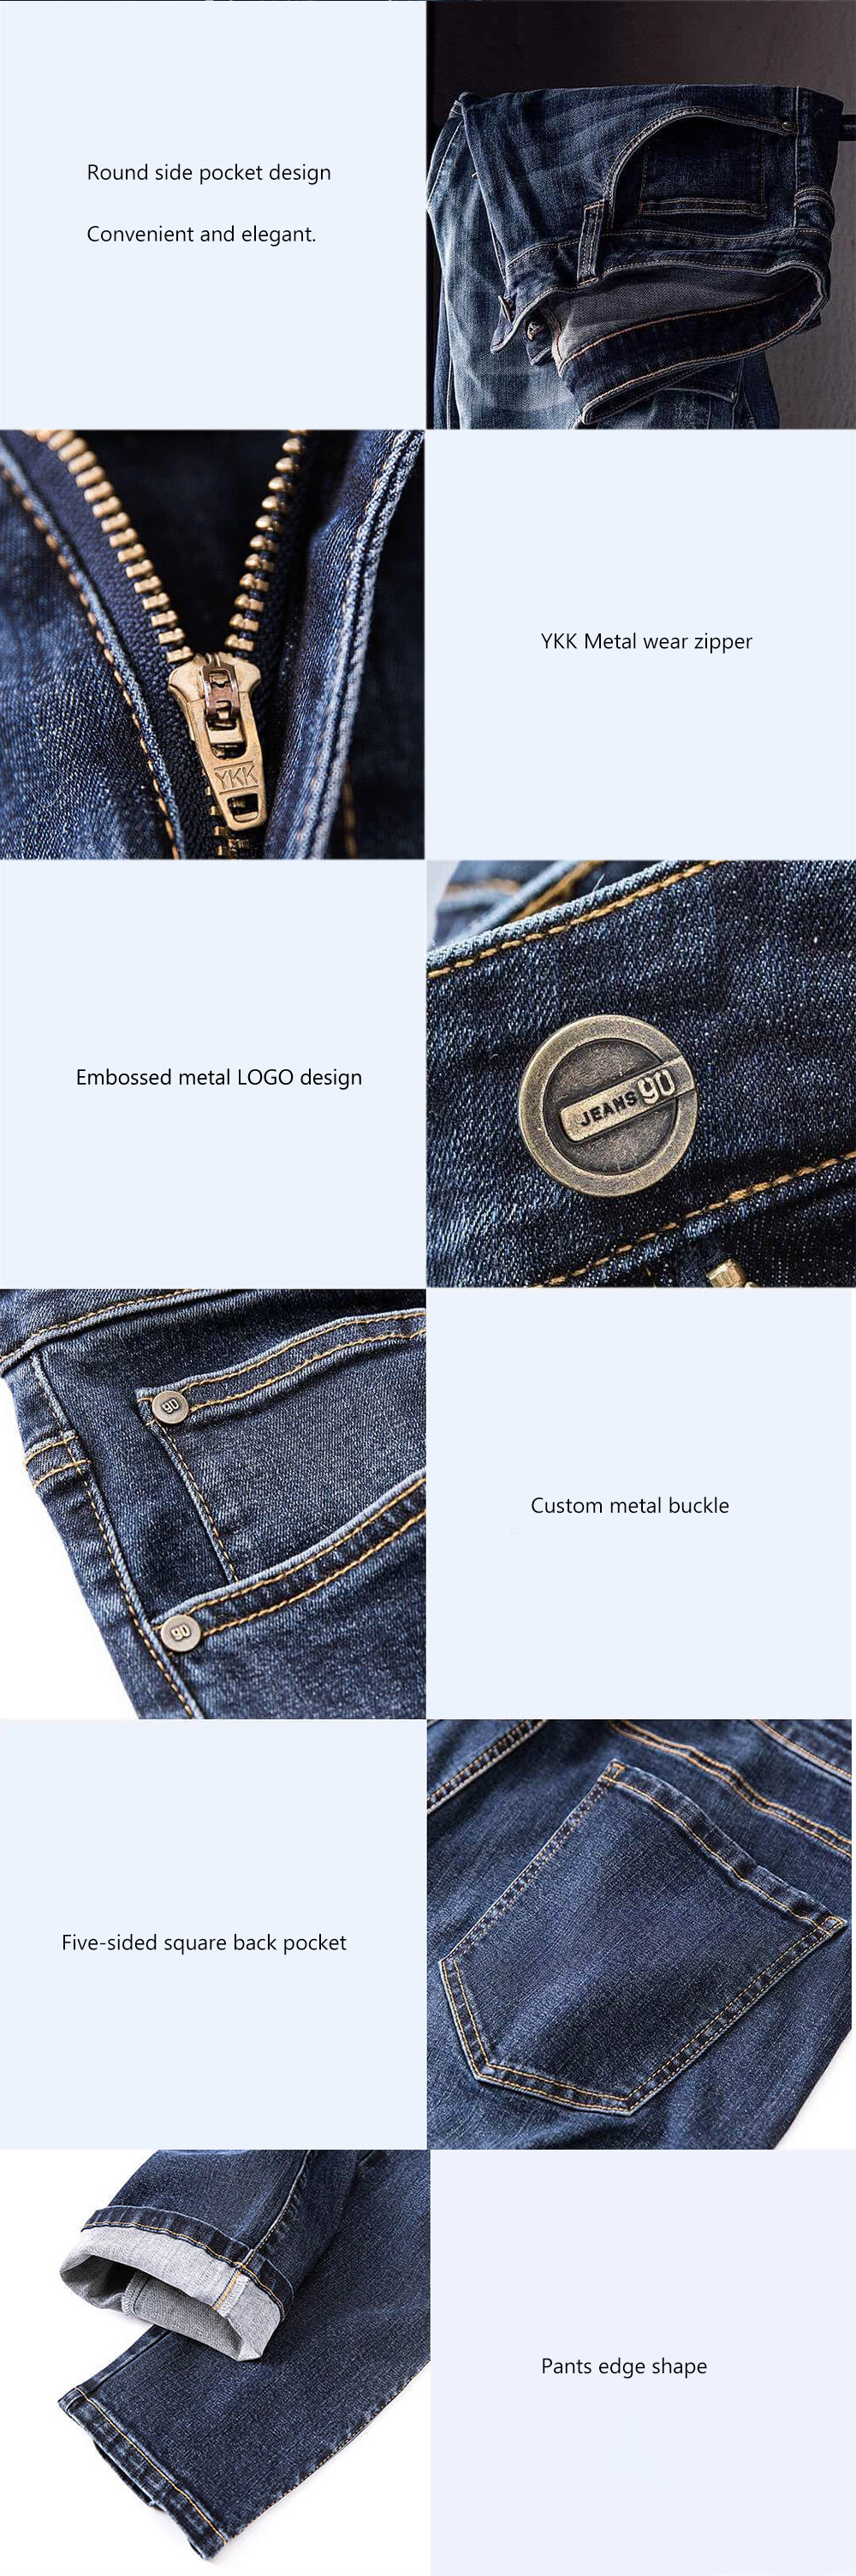 Men Comfortable Stylish Jeans from Xiaomi Youpin